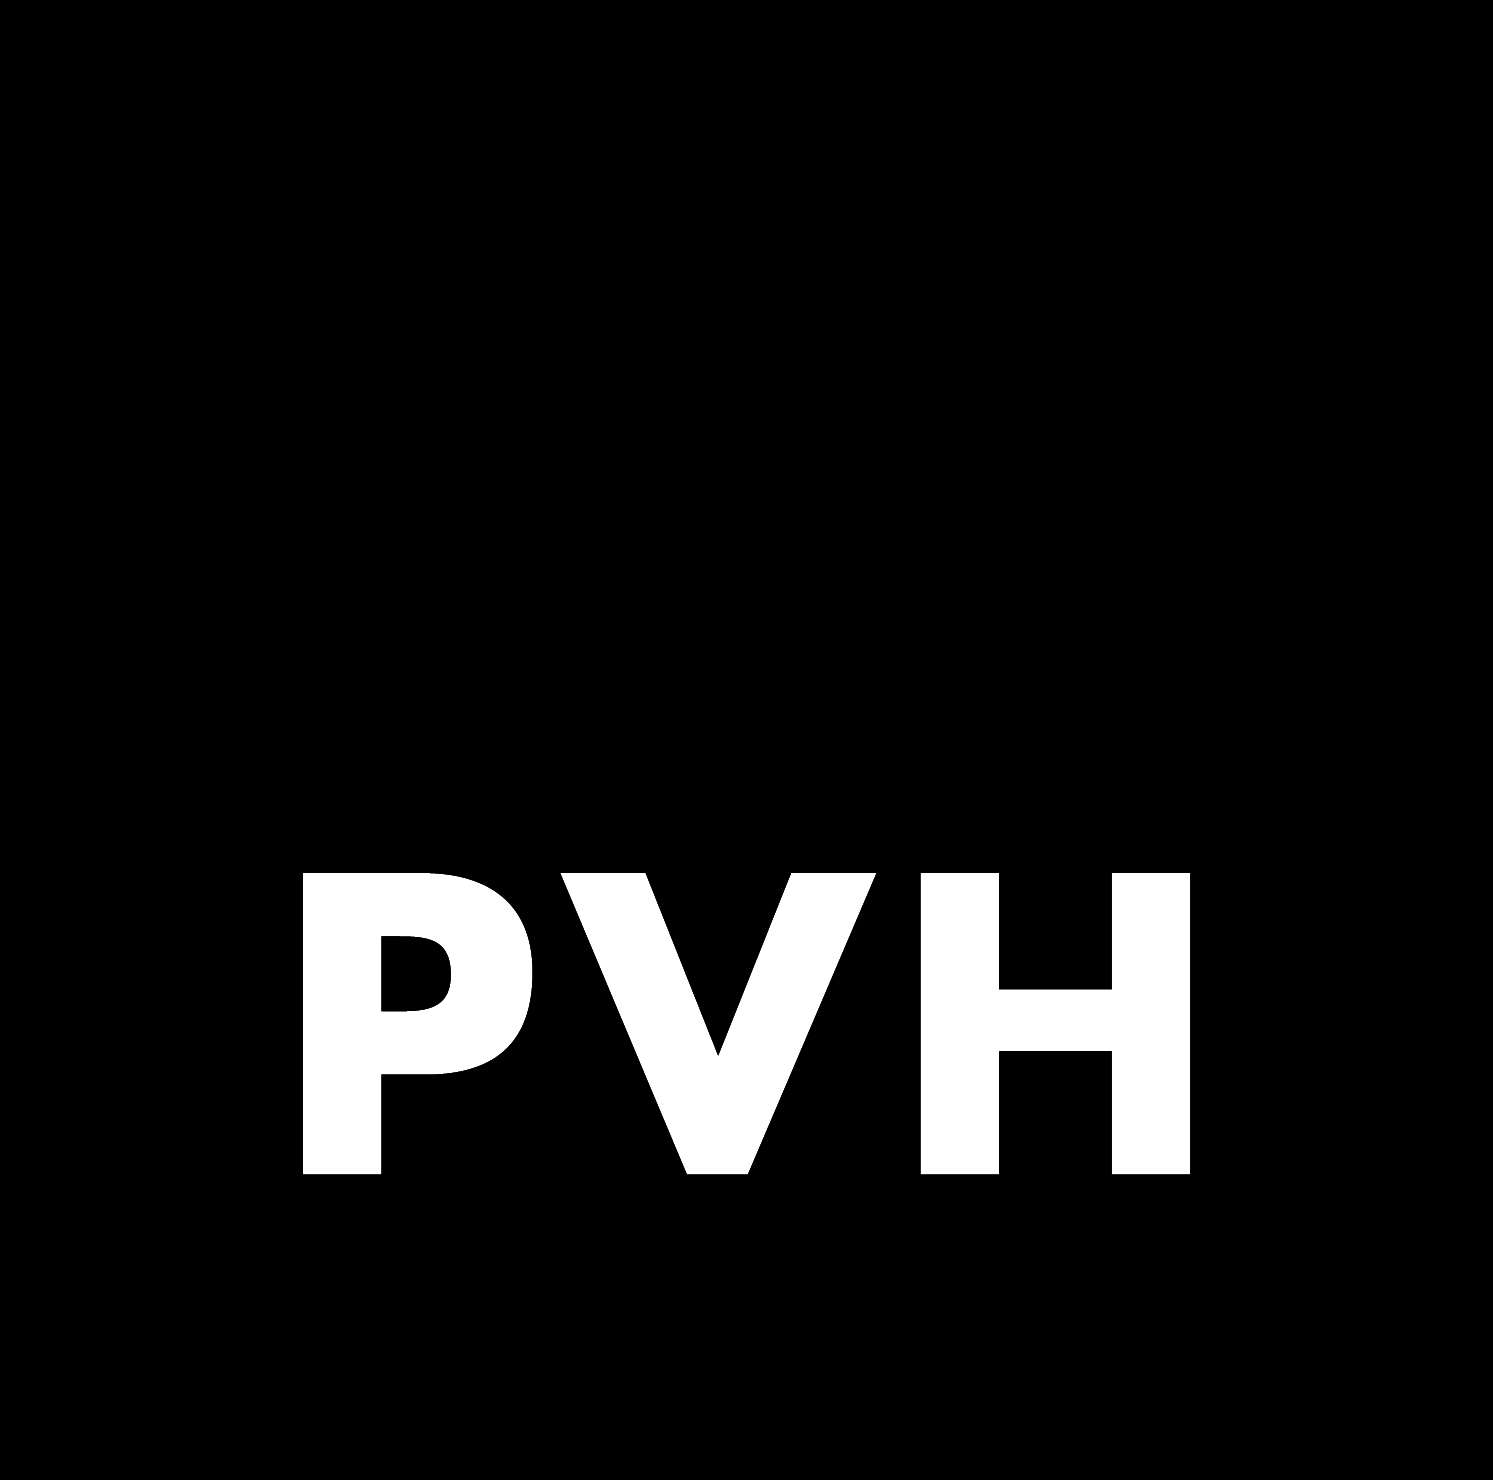 PVH joins Fashion for Good